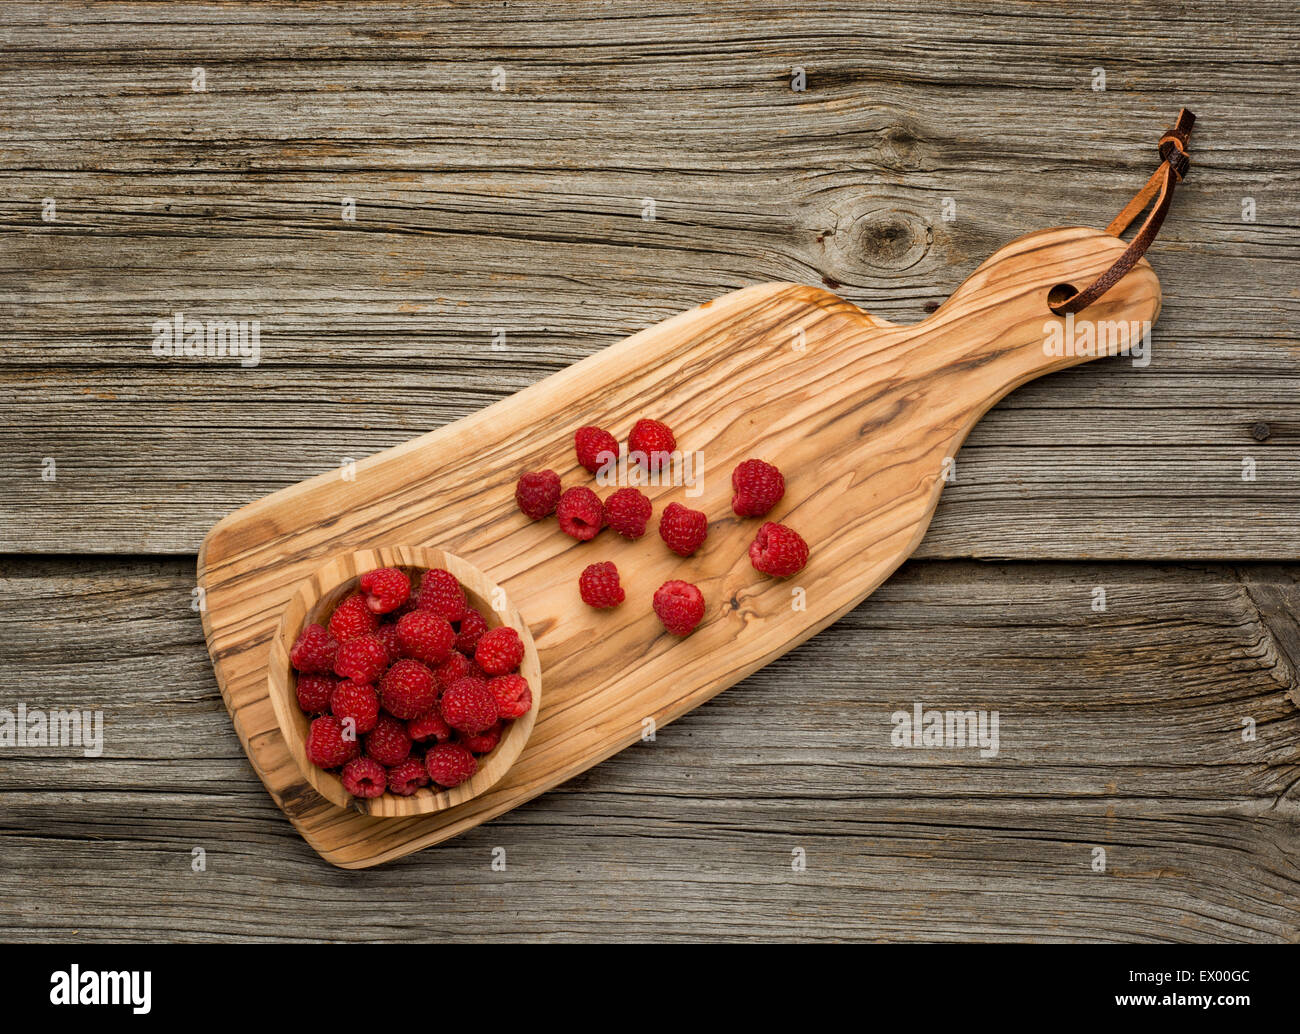 Raspberries in olive wood bowl on old wooden background Stock Photo